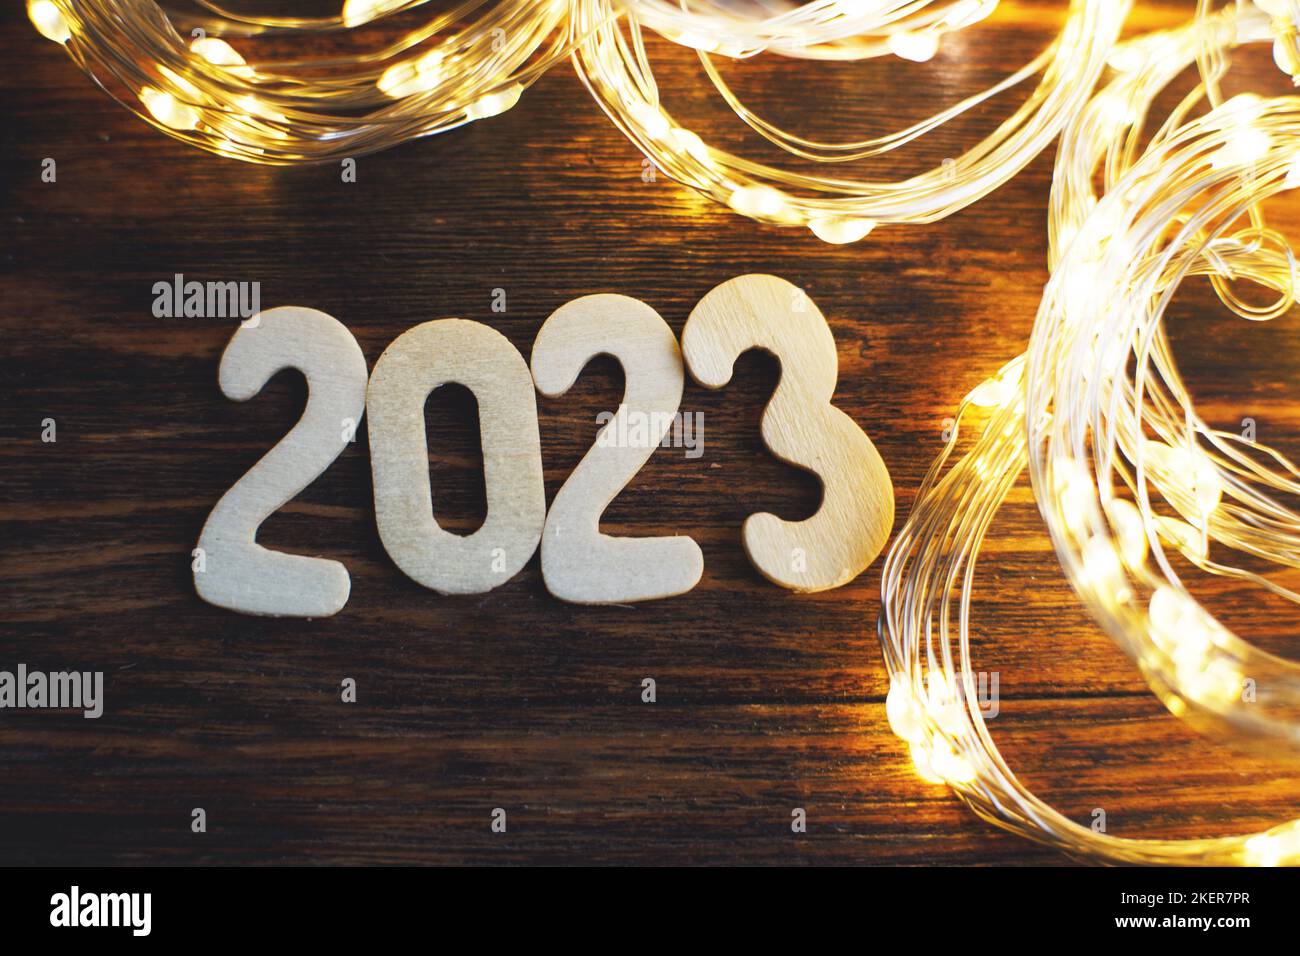 wooden number 2023 on christmas shiny wooden background. with sparkle festive gold garland. Stock Photo